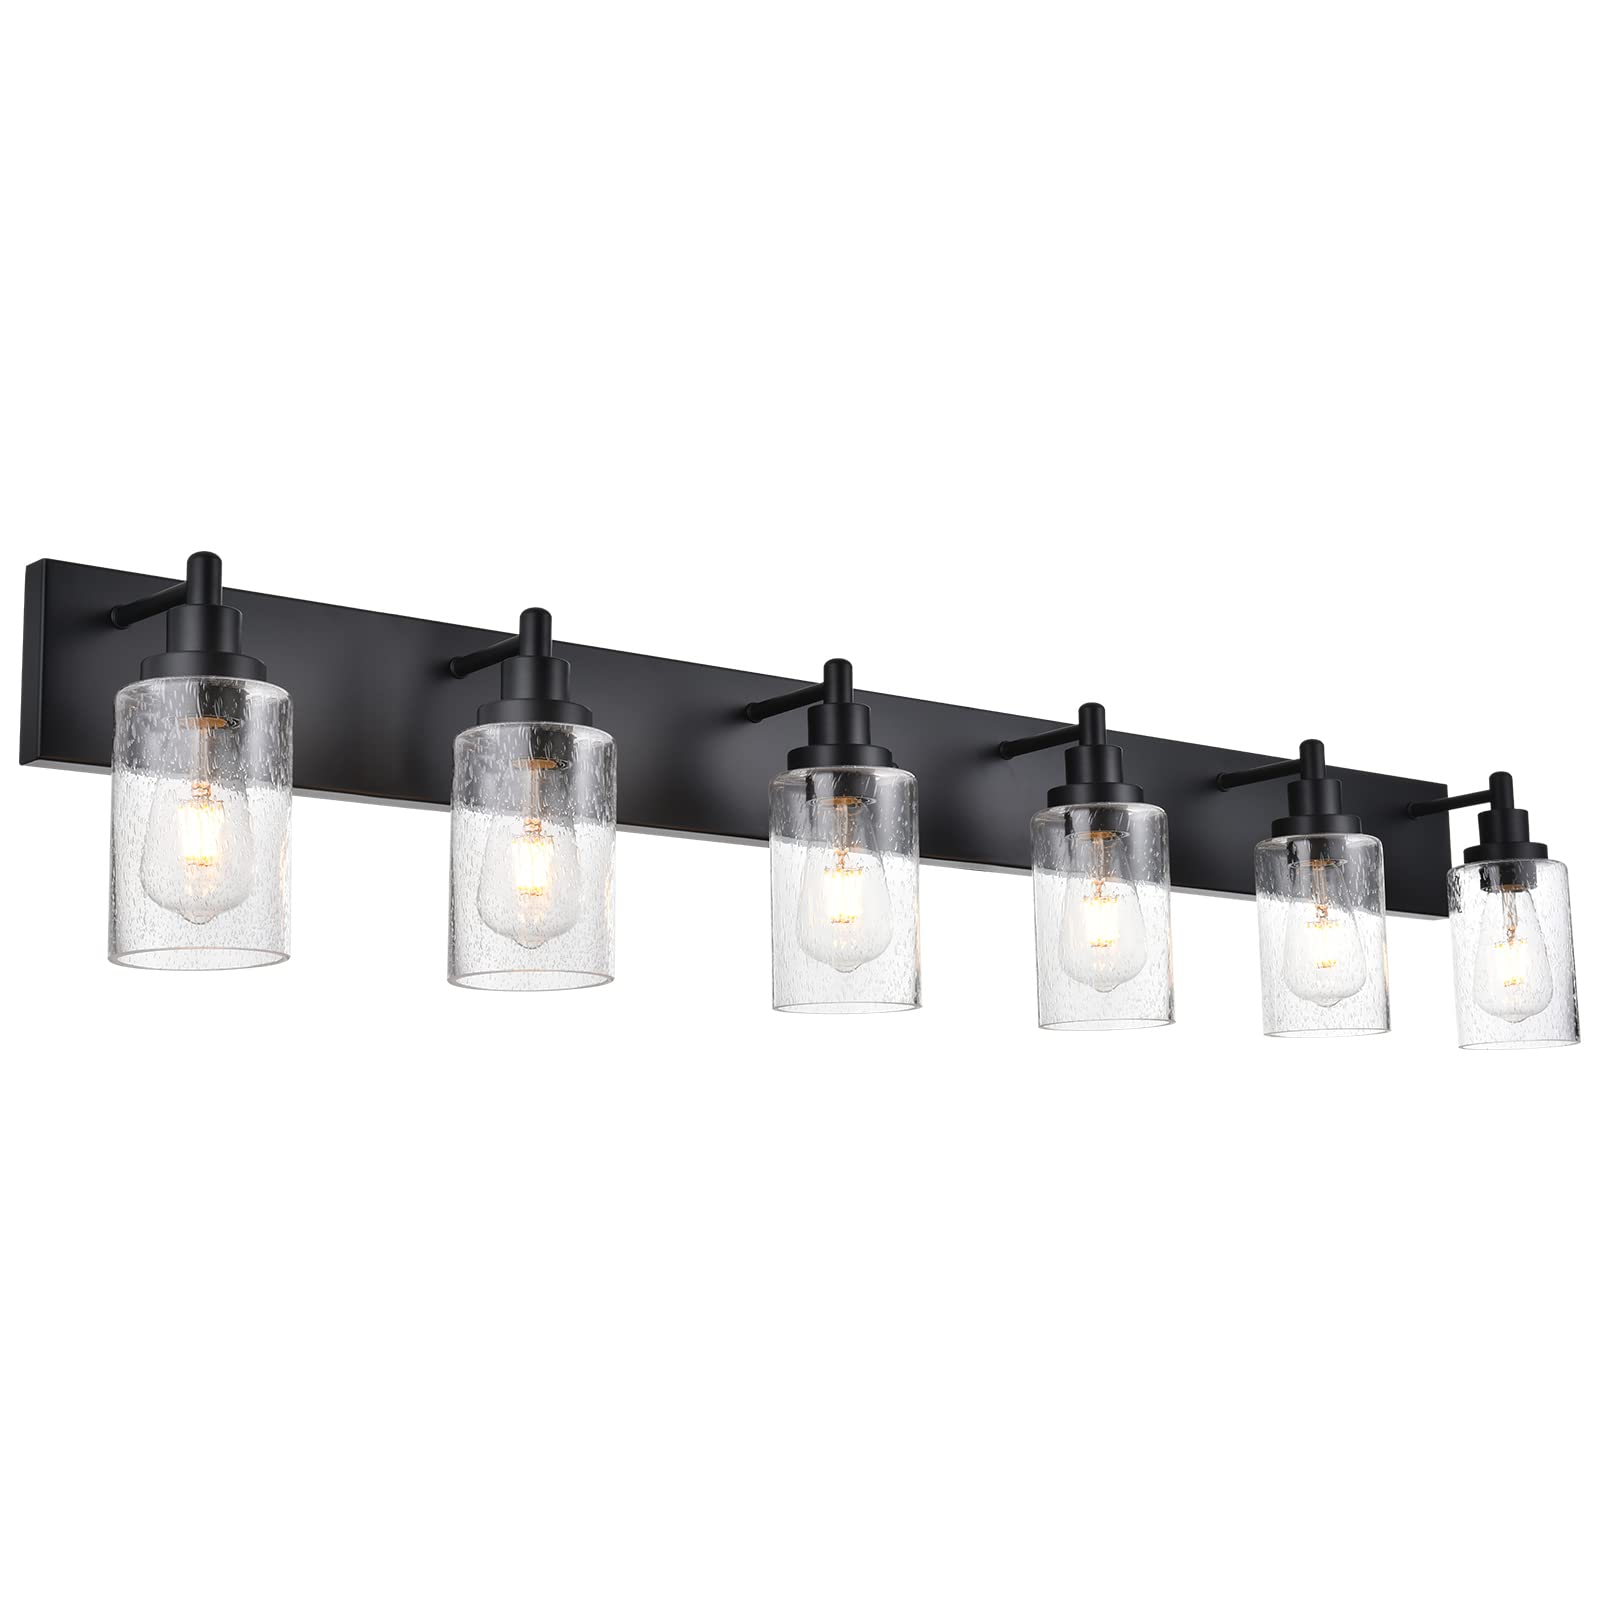 MELUCEE 6 Lights Bathroom Vanity Light Fixtures Over Mirror, Dimmable Vanity Lights Matte Black Finish with Seeded Glass Shade, Metal Wall Lighting for Bath Kitchen Living Room